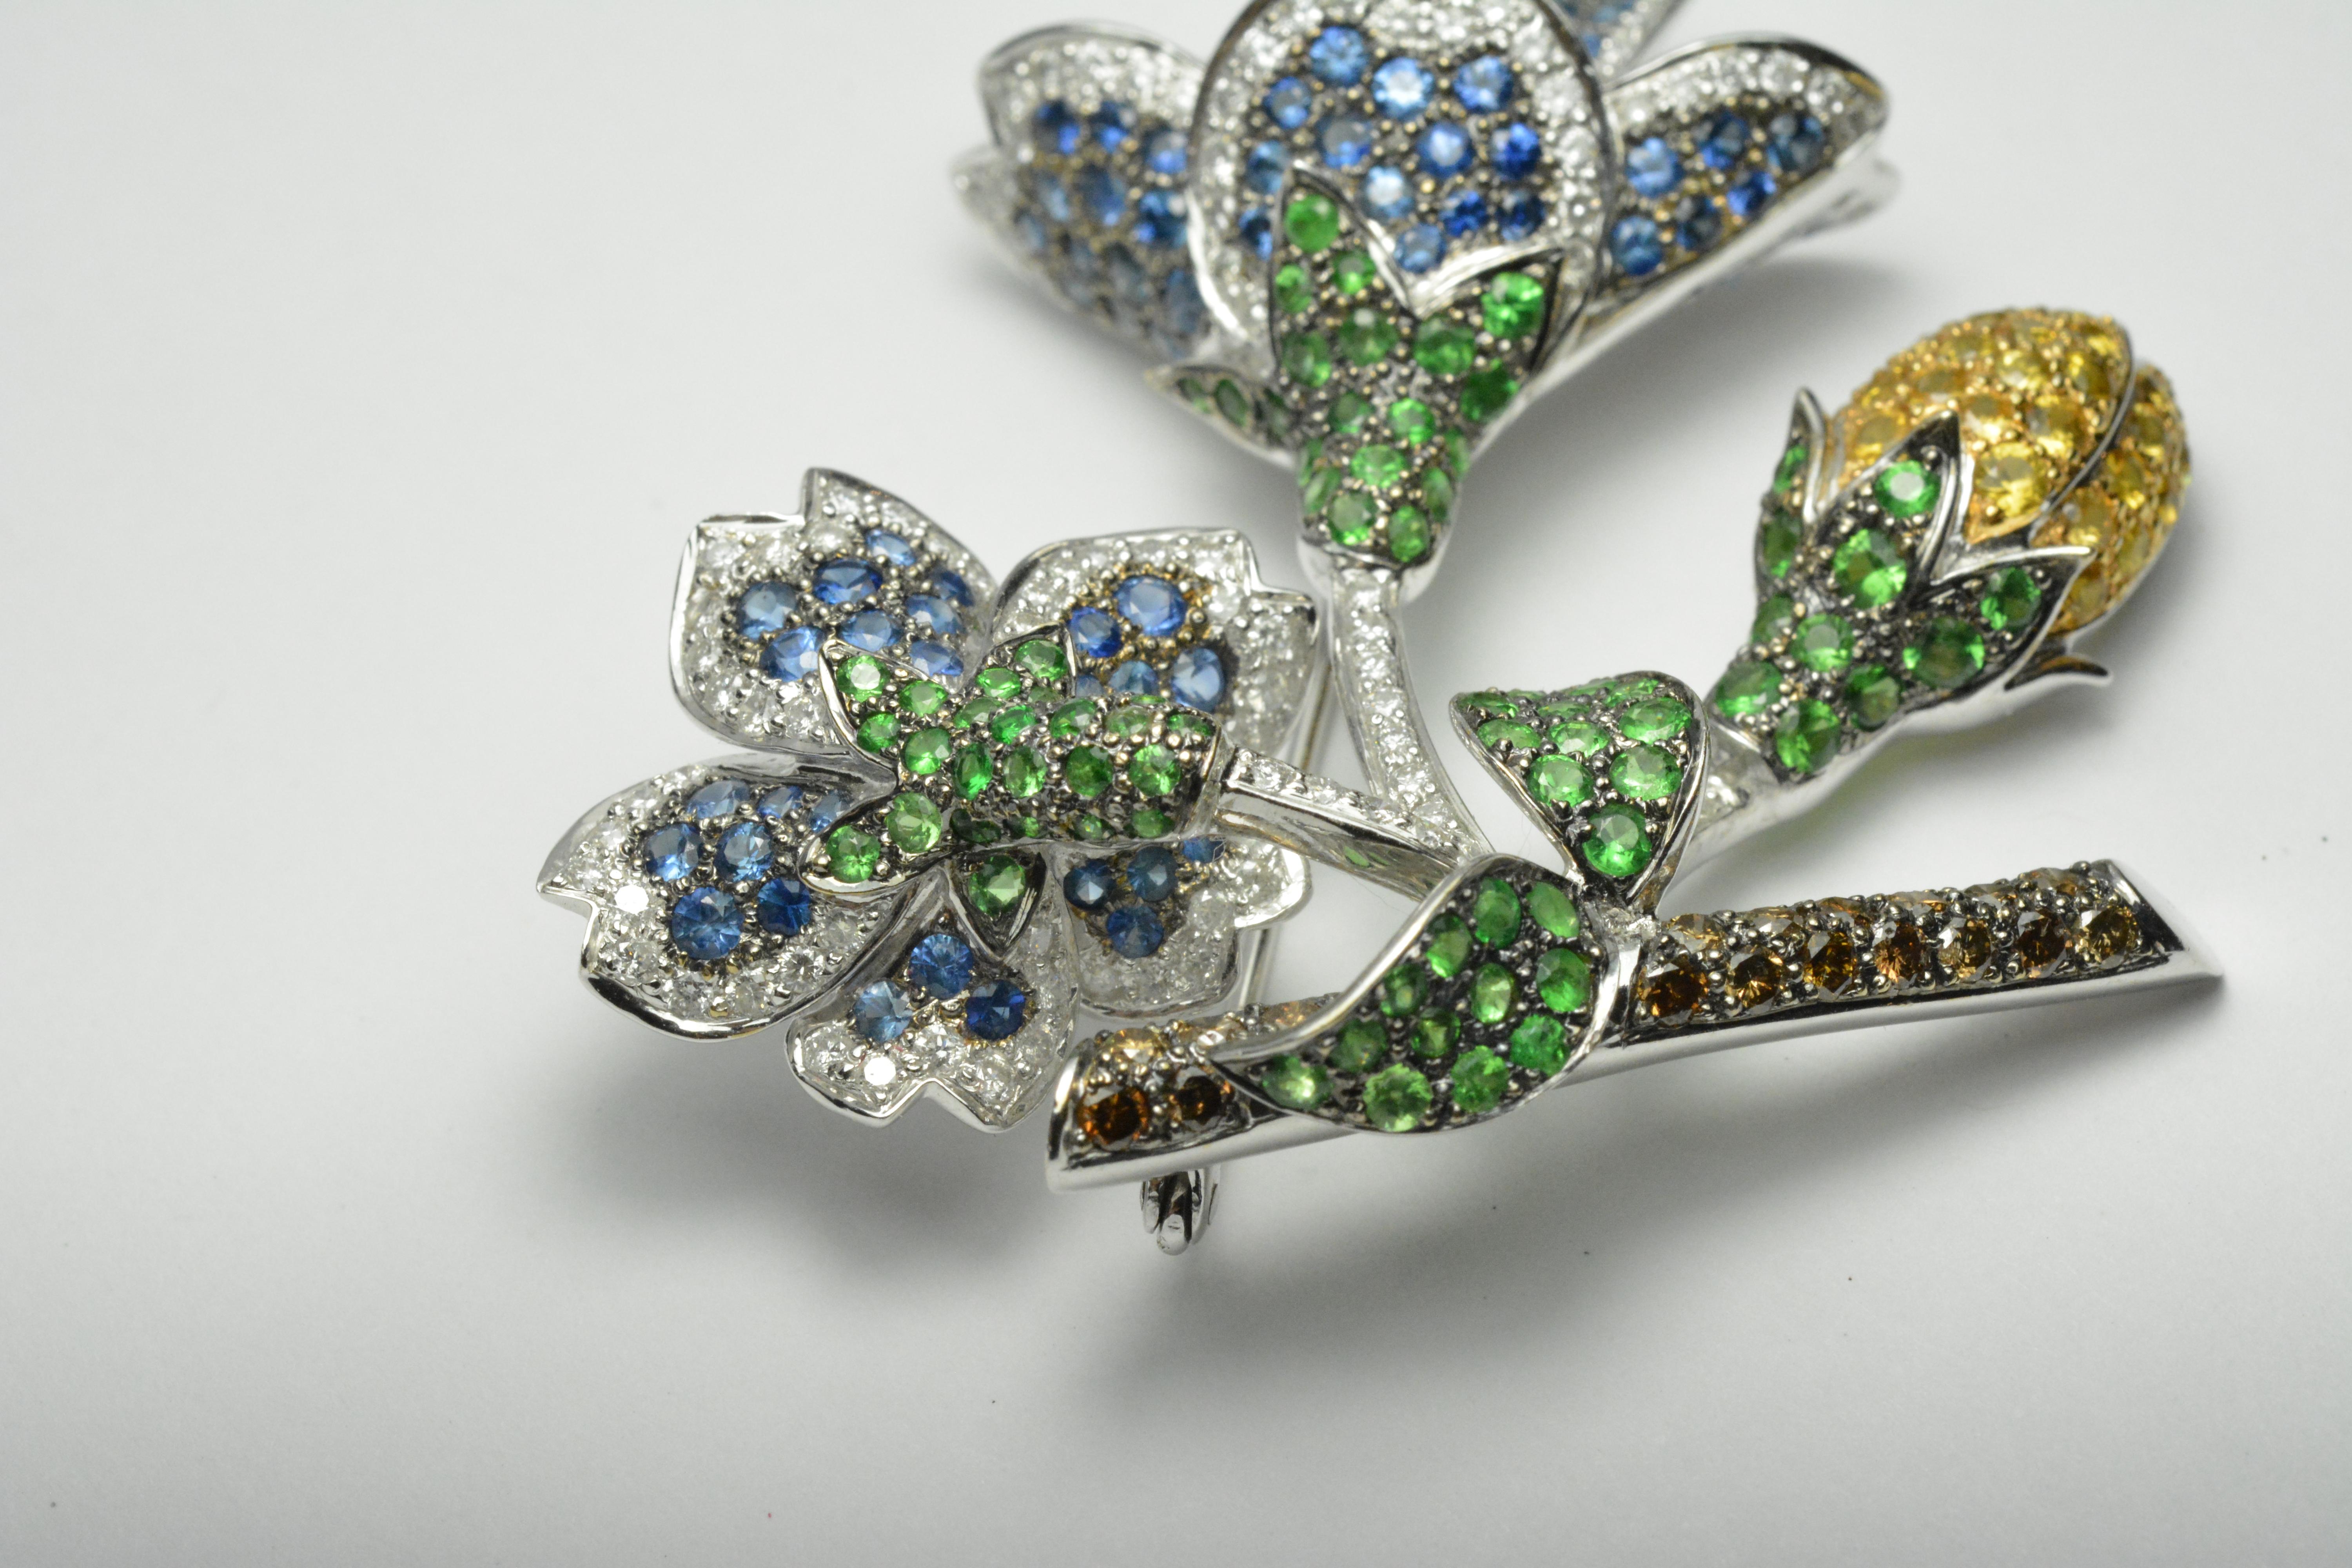 Colored stone and diamond custom brooch in 18k white gold.

Tests 18k and weighs 23 grams.

There is 7.25 total carats of round brilliant cut diamonds, G color, VS to Si clarity.

The other stones are natural  yellow sapphires, green tsavorite and